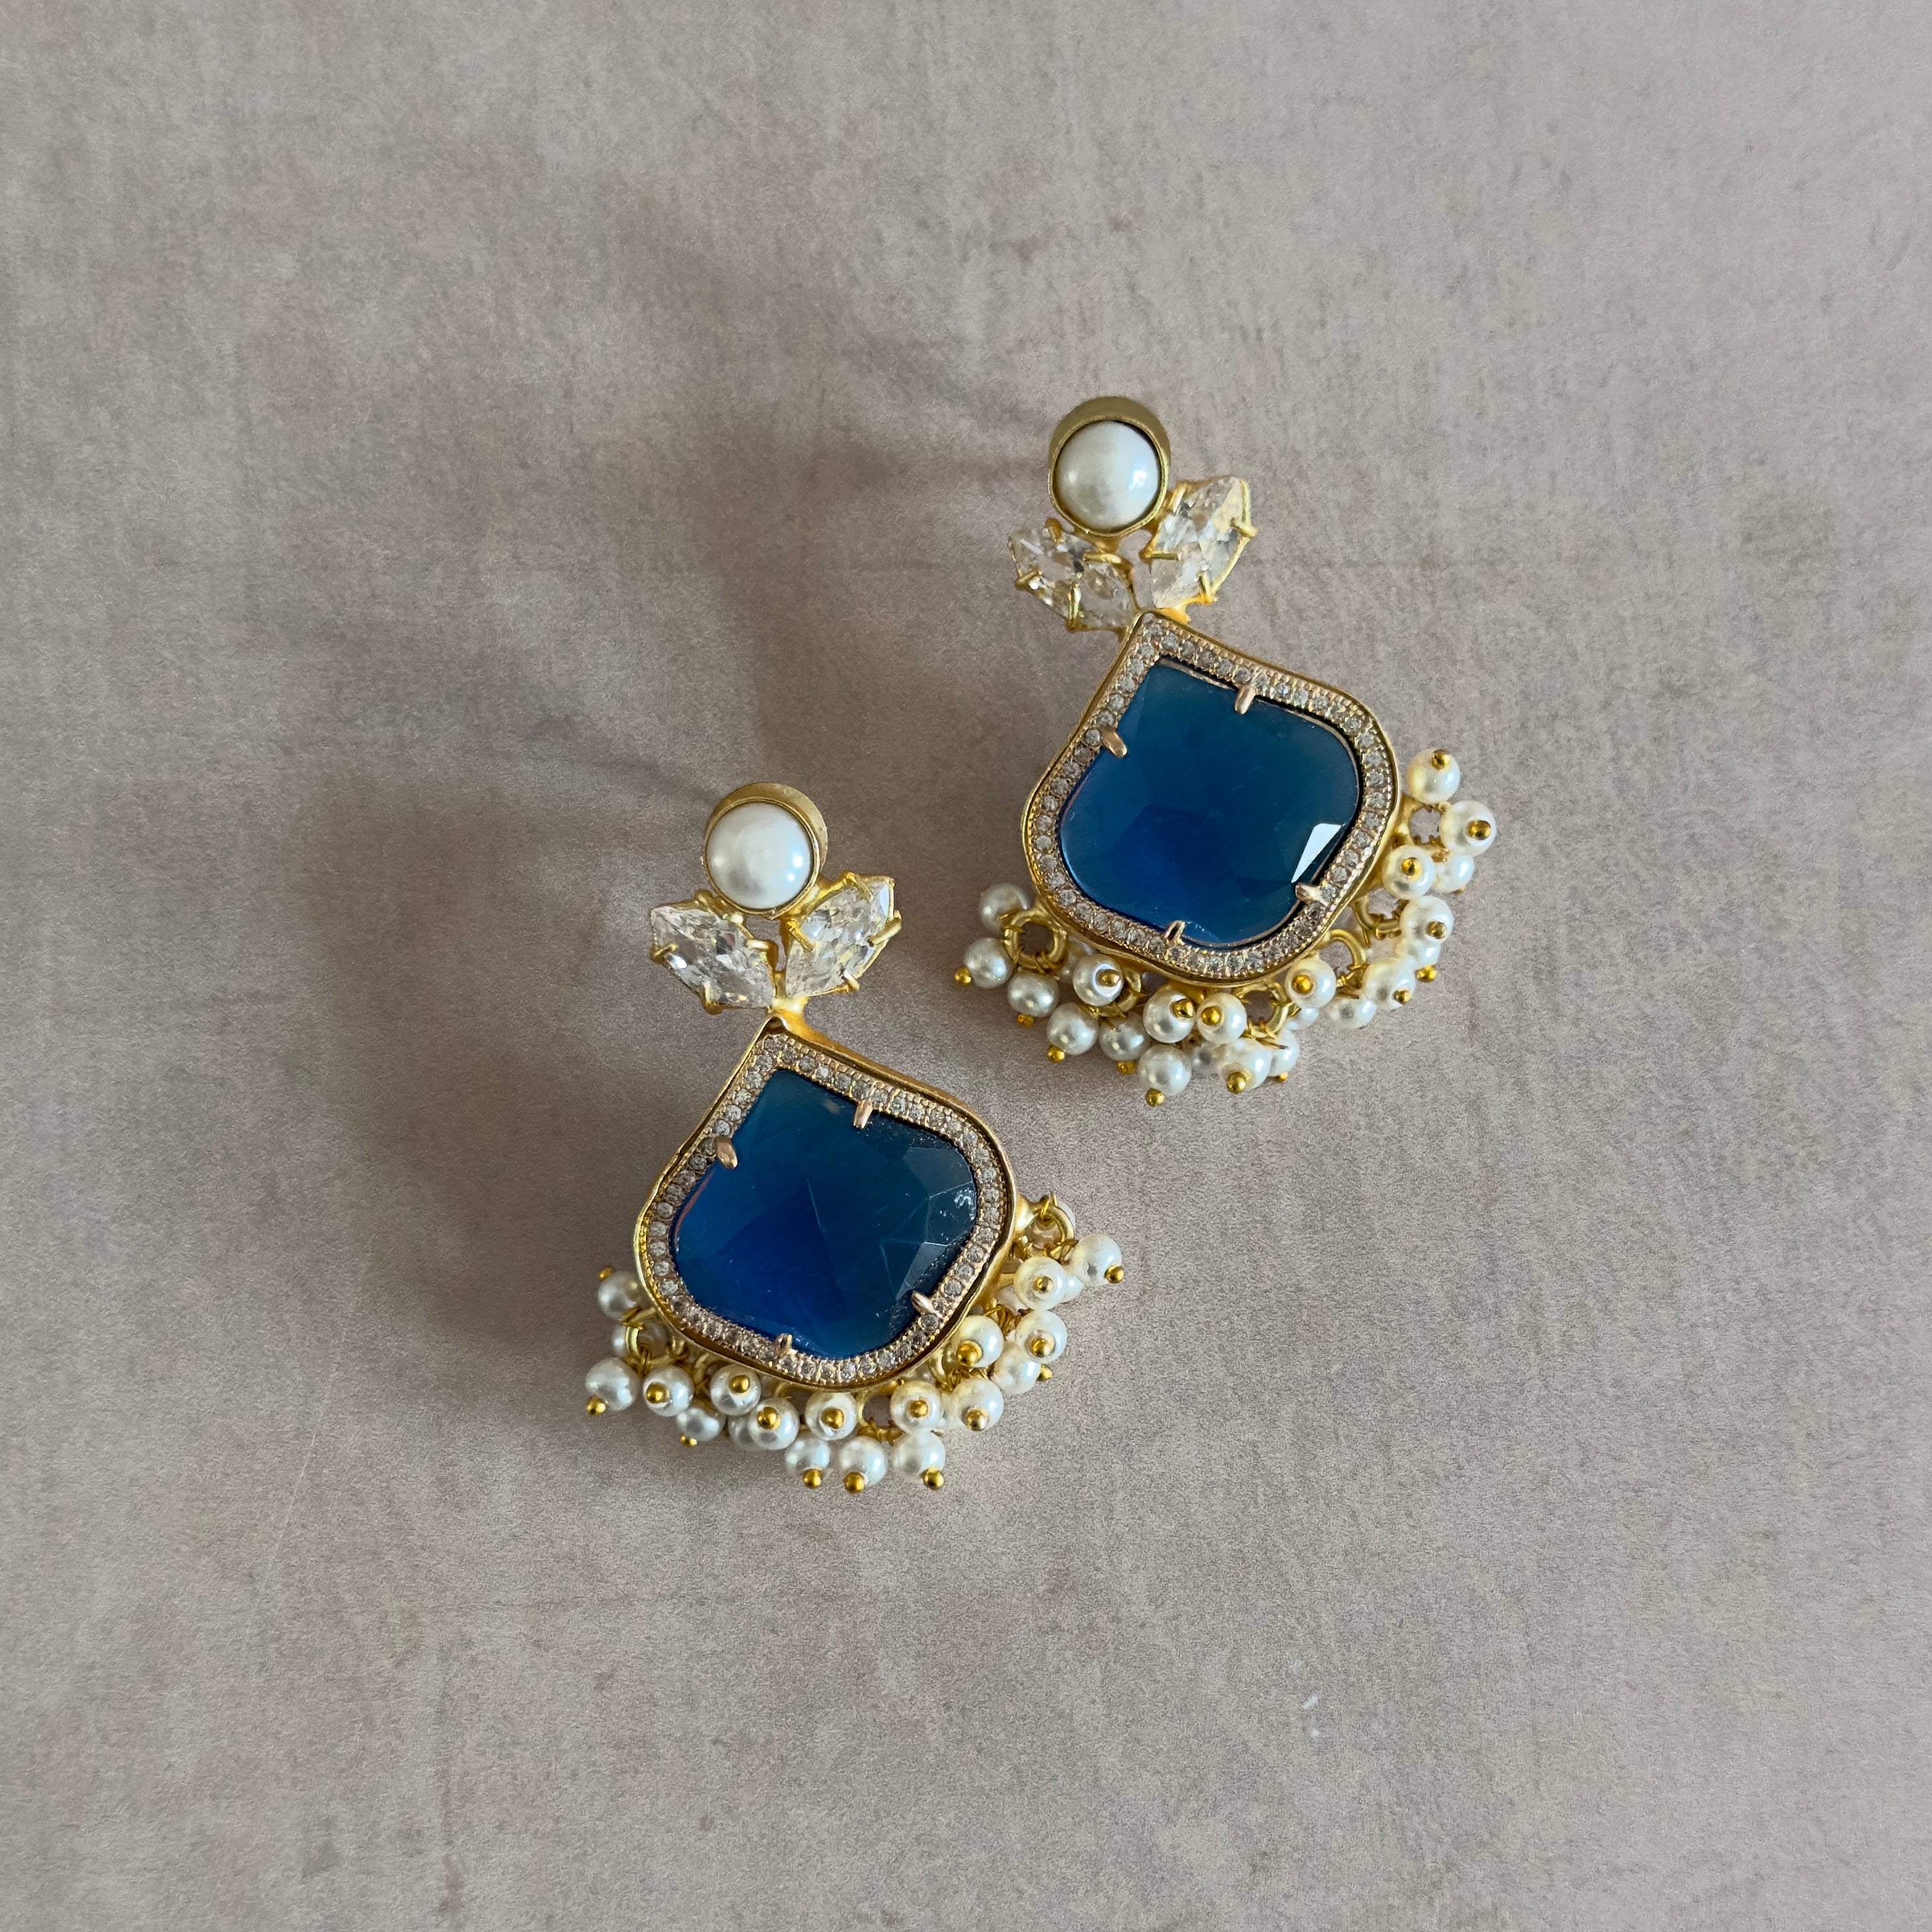 Introducing our Gaia Blue Earrings, a luscious new design featuring freshwater pearls and dazzling cz crystals. The beautiful vibrant blue adds a touch of natural elegance to these luxurious and exclusive earrings. Elevate your style today with these exquisit